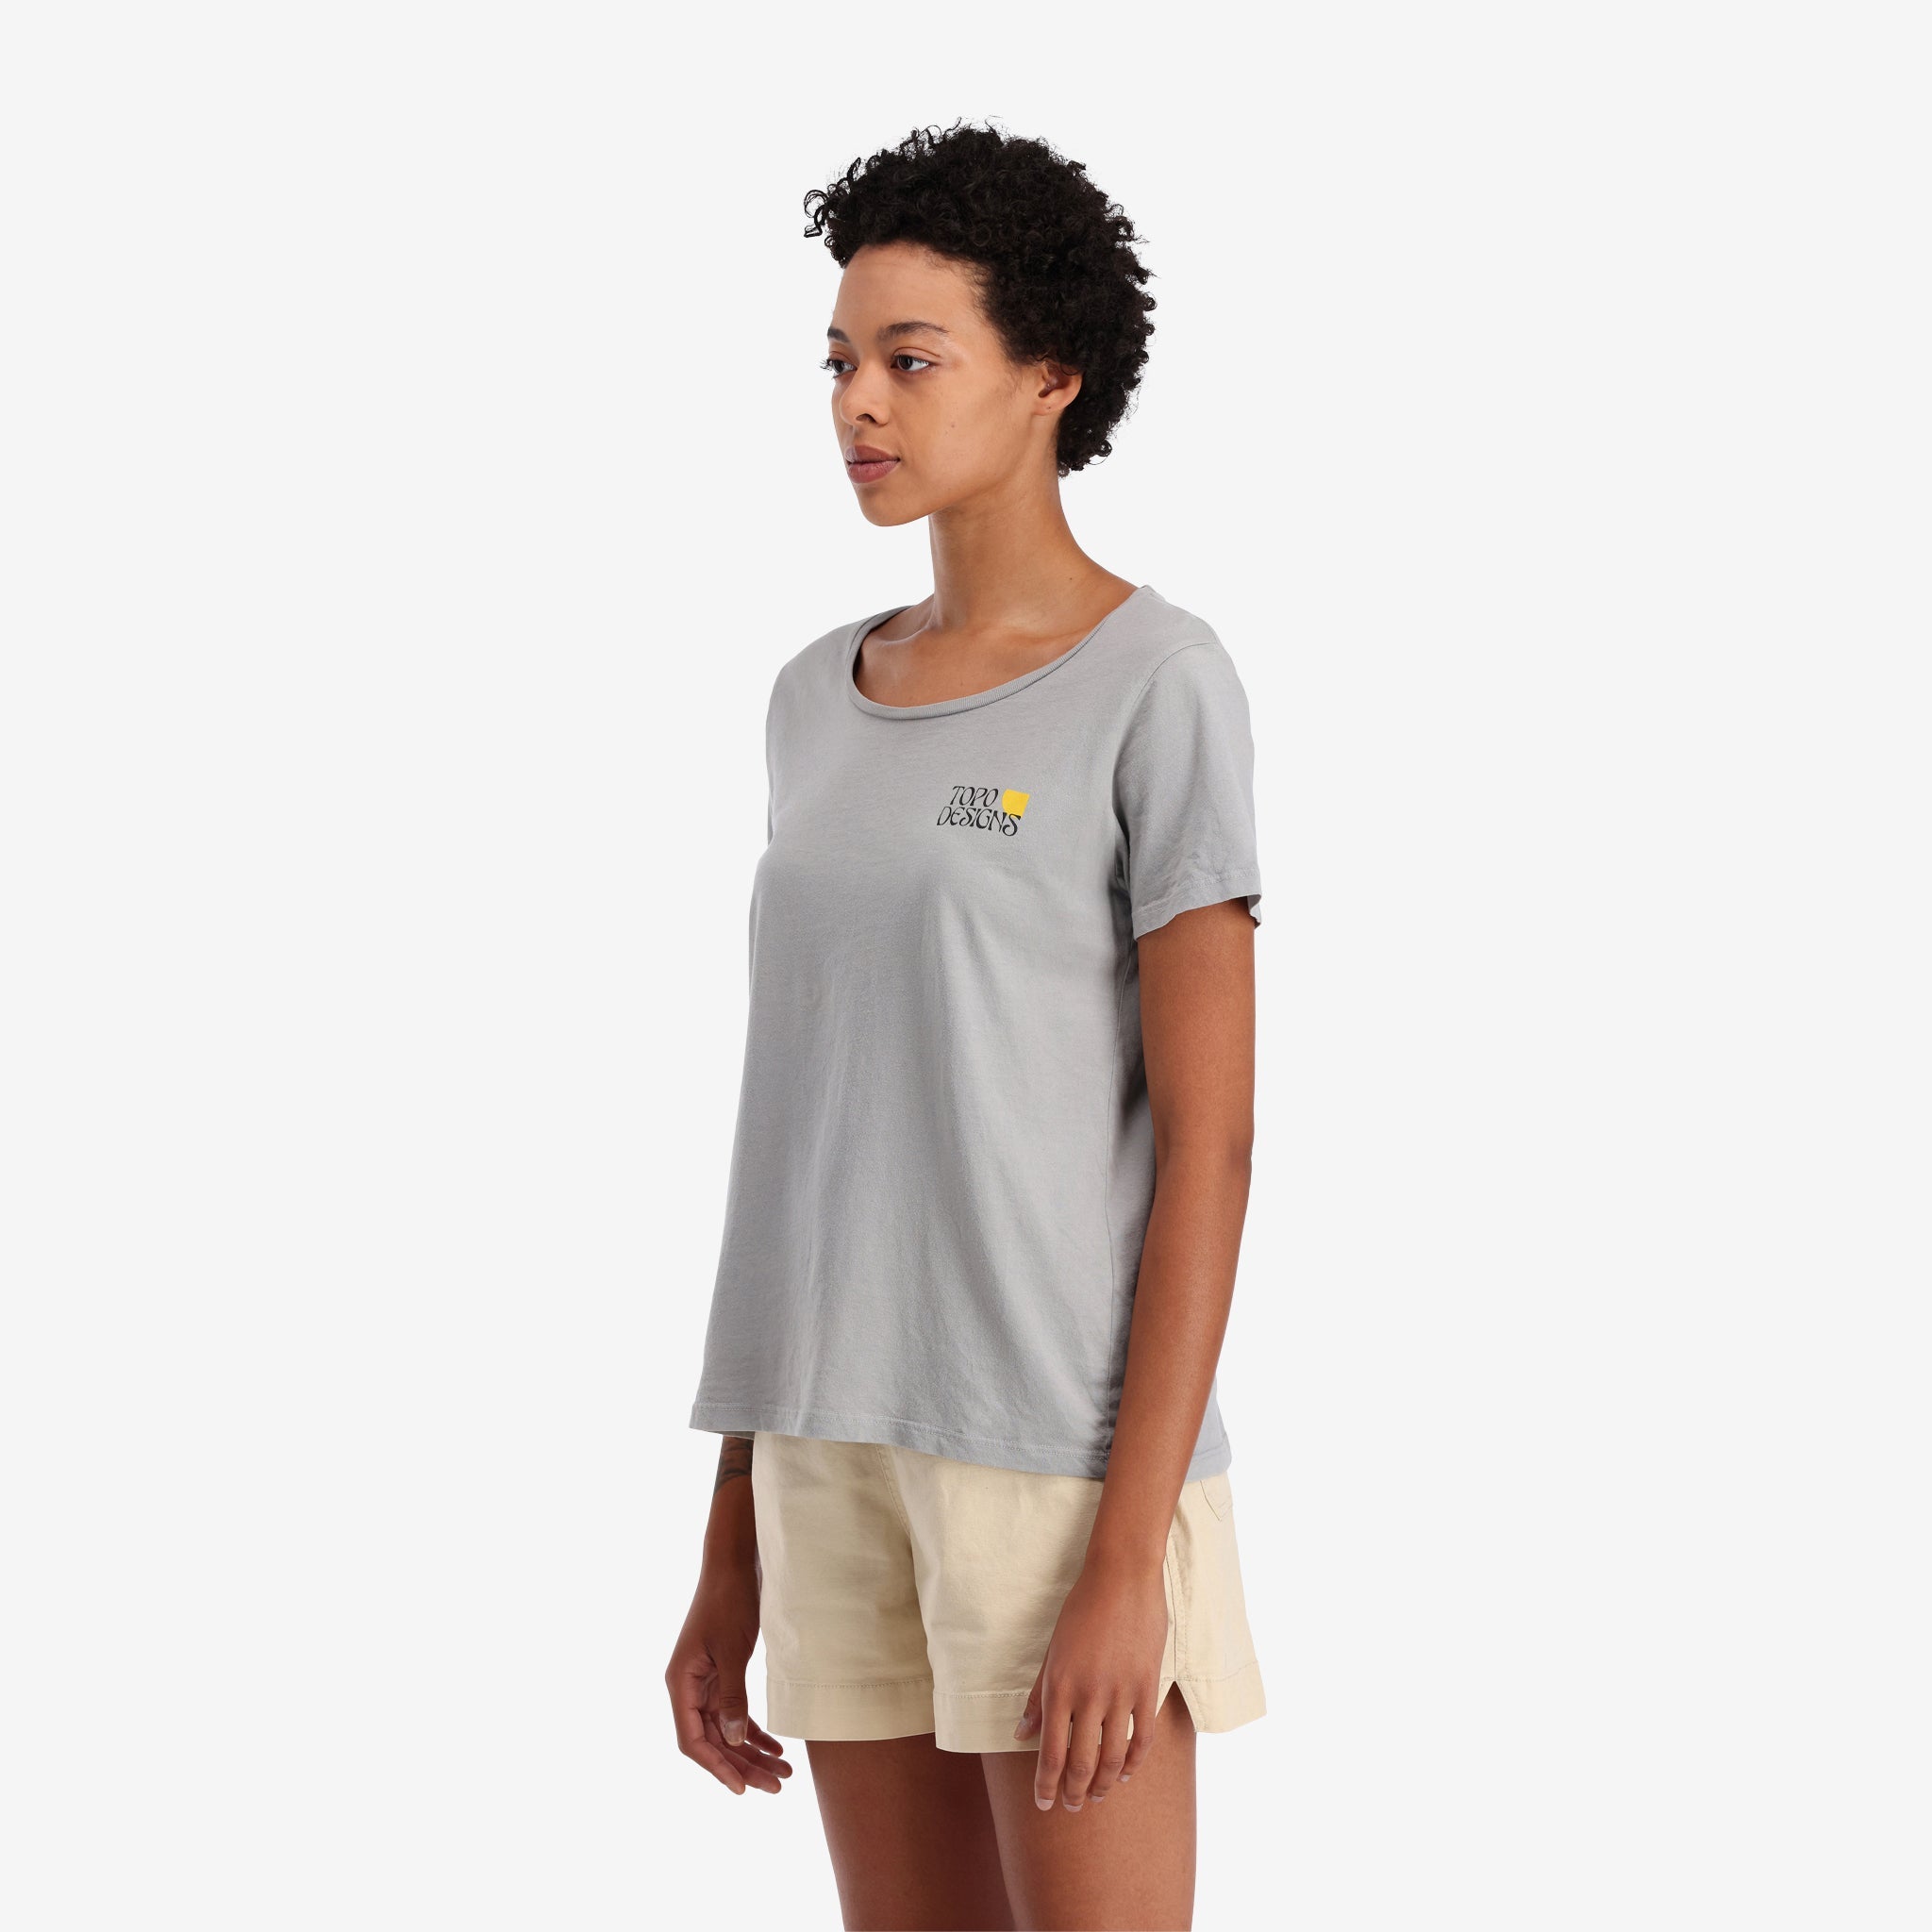 On model left side view of Topo Designs Women's Canyons Tee 100% organic cotton short sleeve graphic logo t-shirt in "gray".